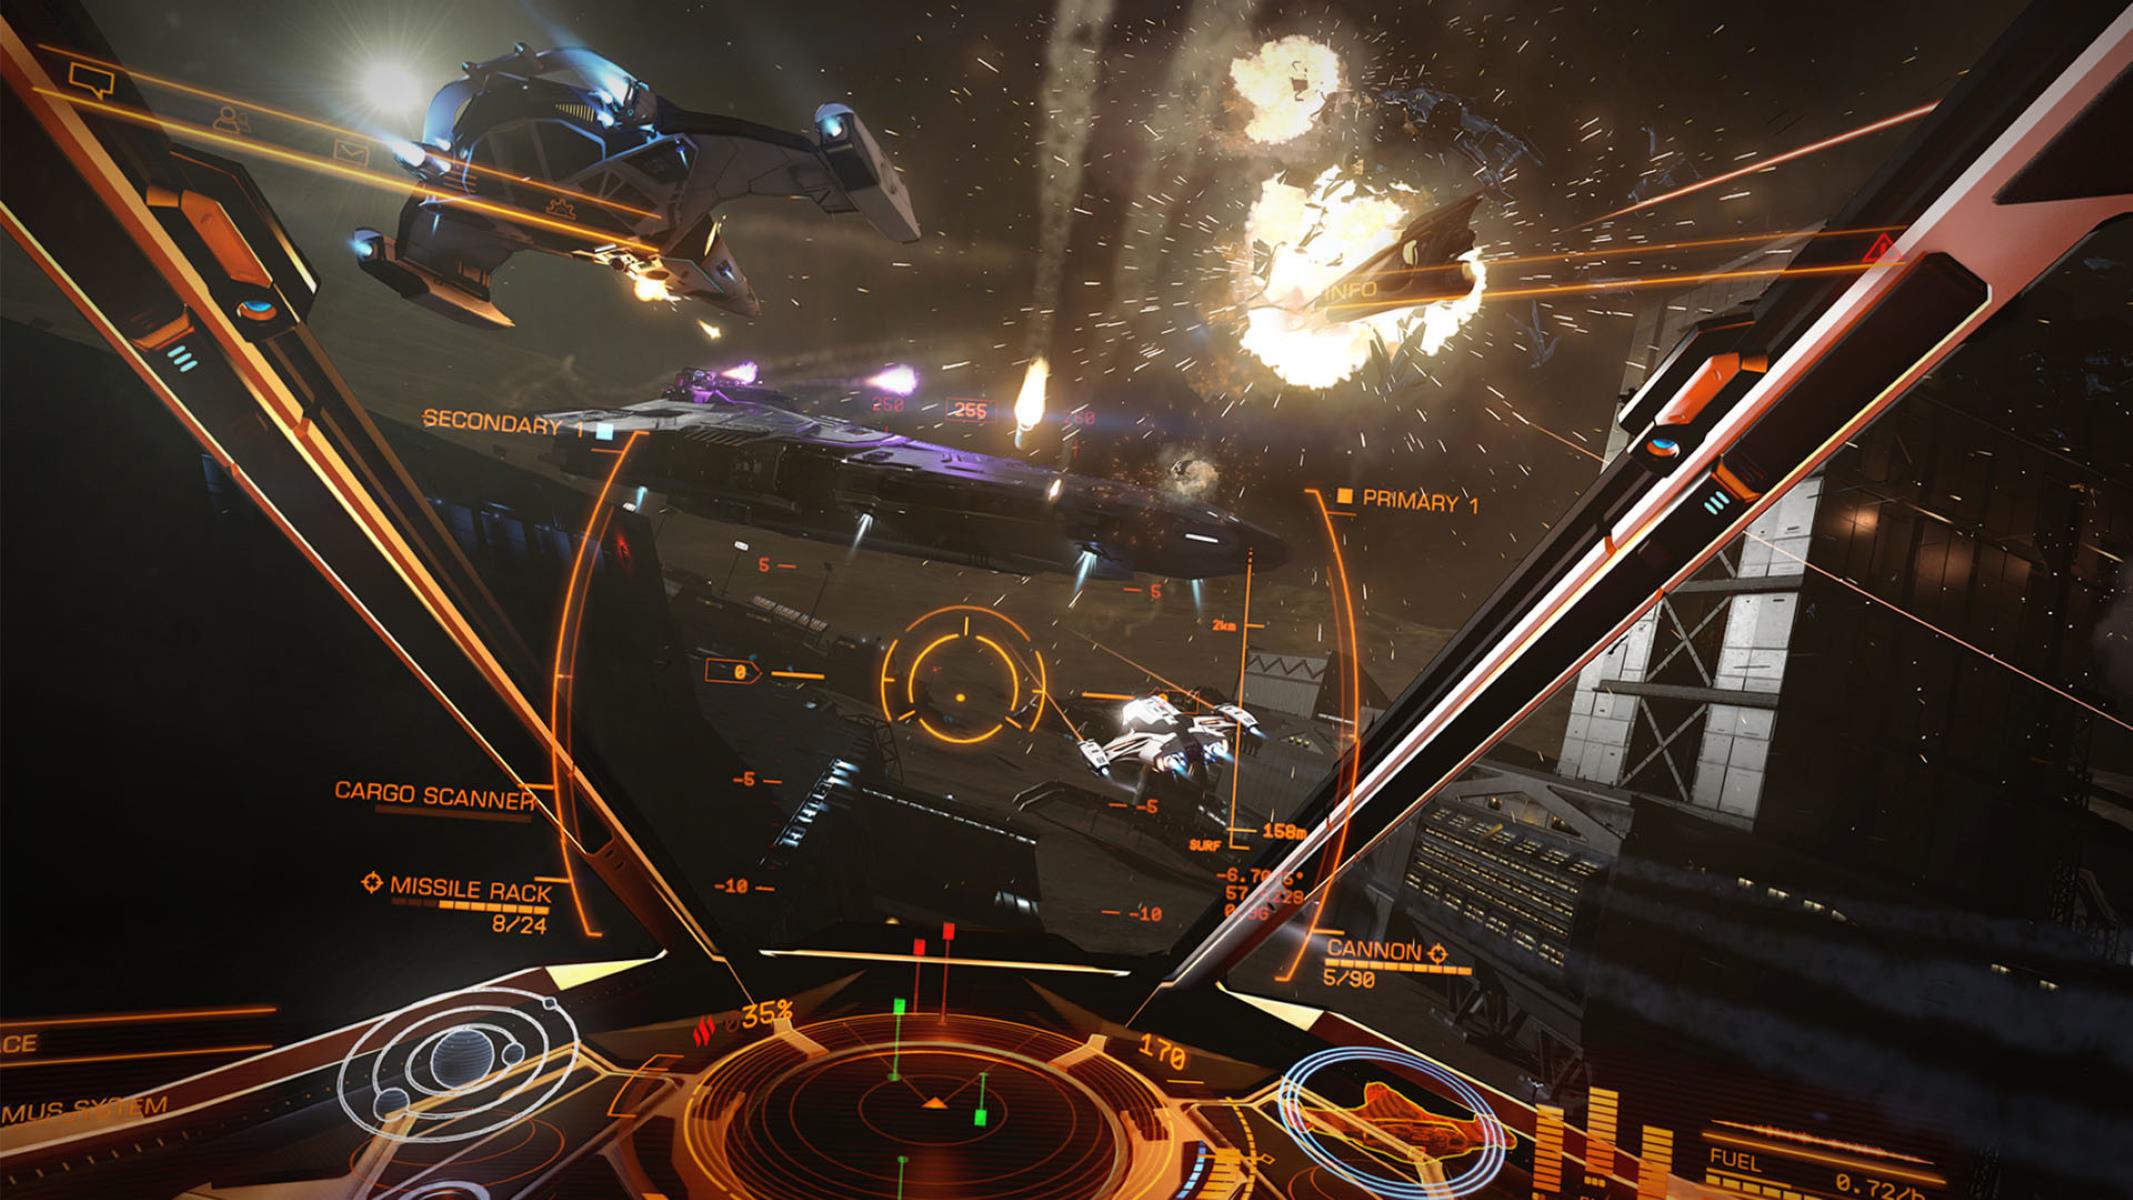 How To Play Elite Dangerous On HTC Vive